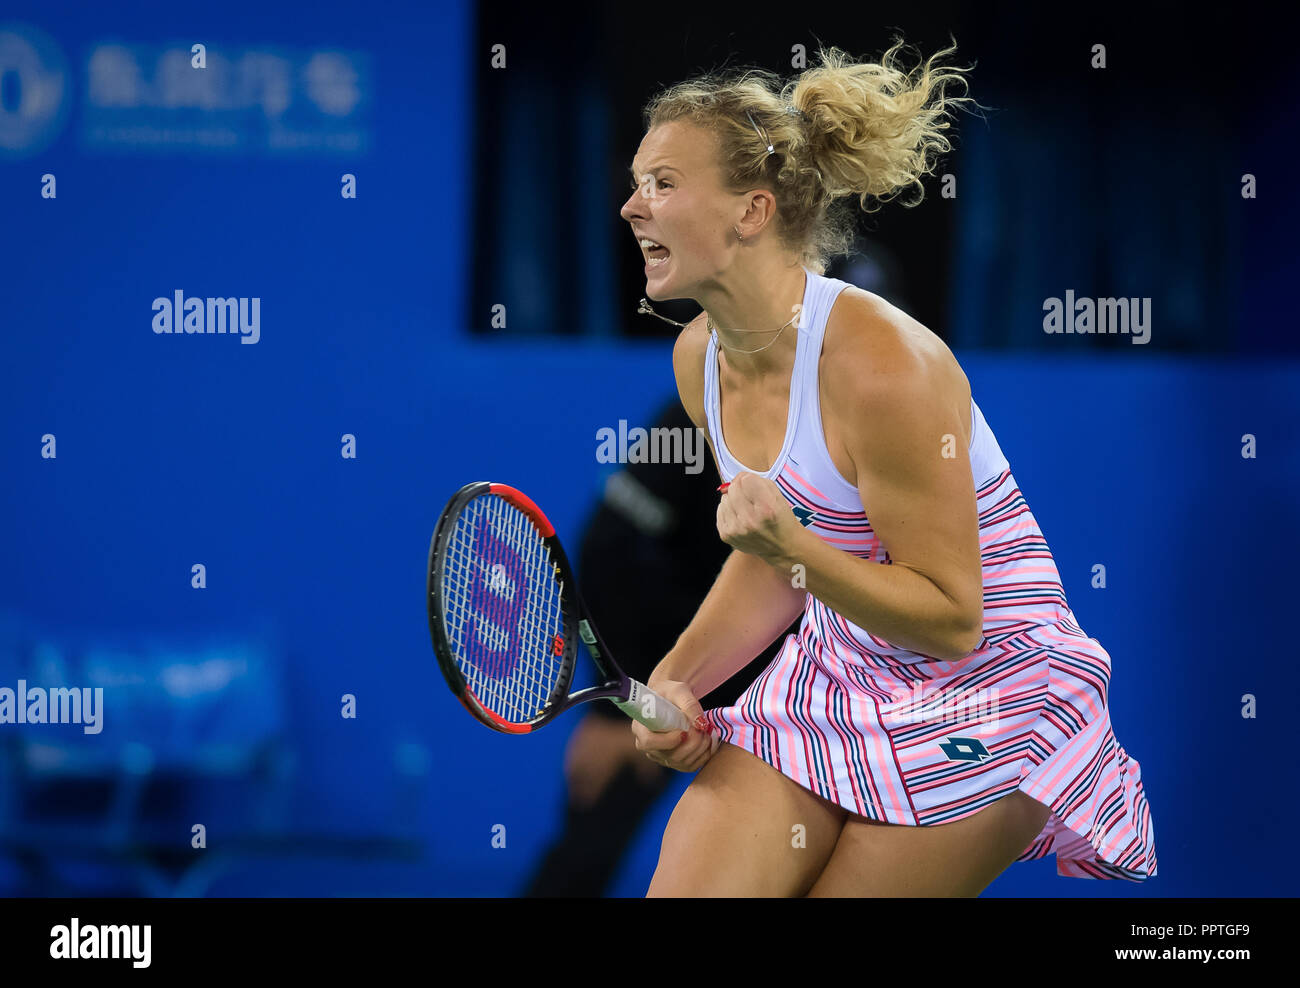 September 25, 2018 - Katerina Siniakova of the Czech Republic in action  during her second-round match